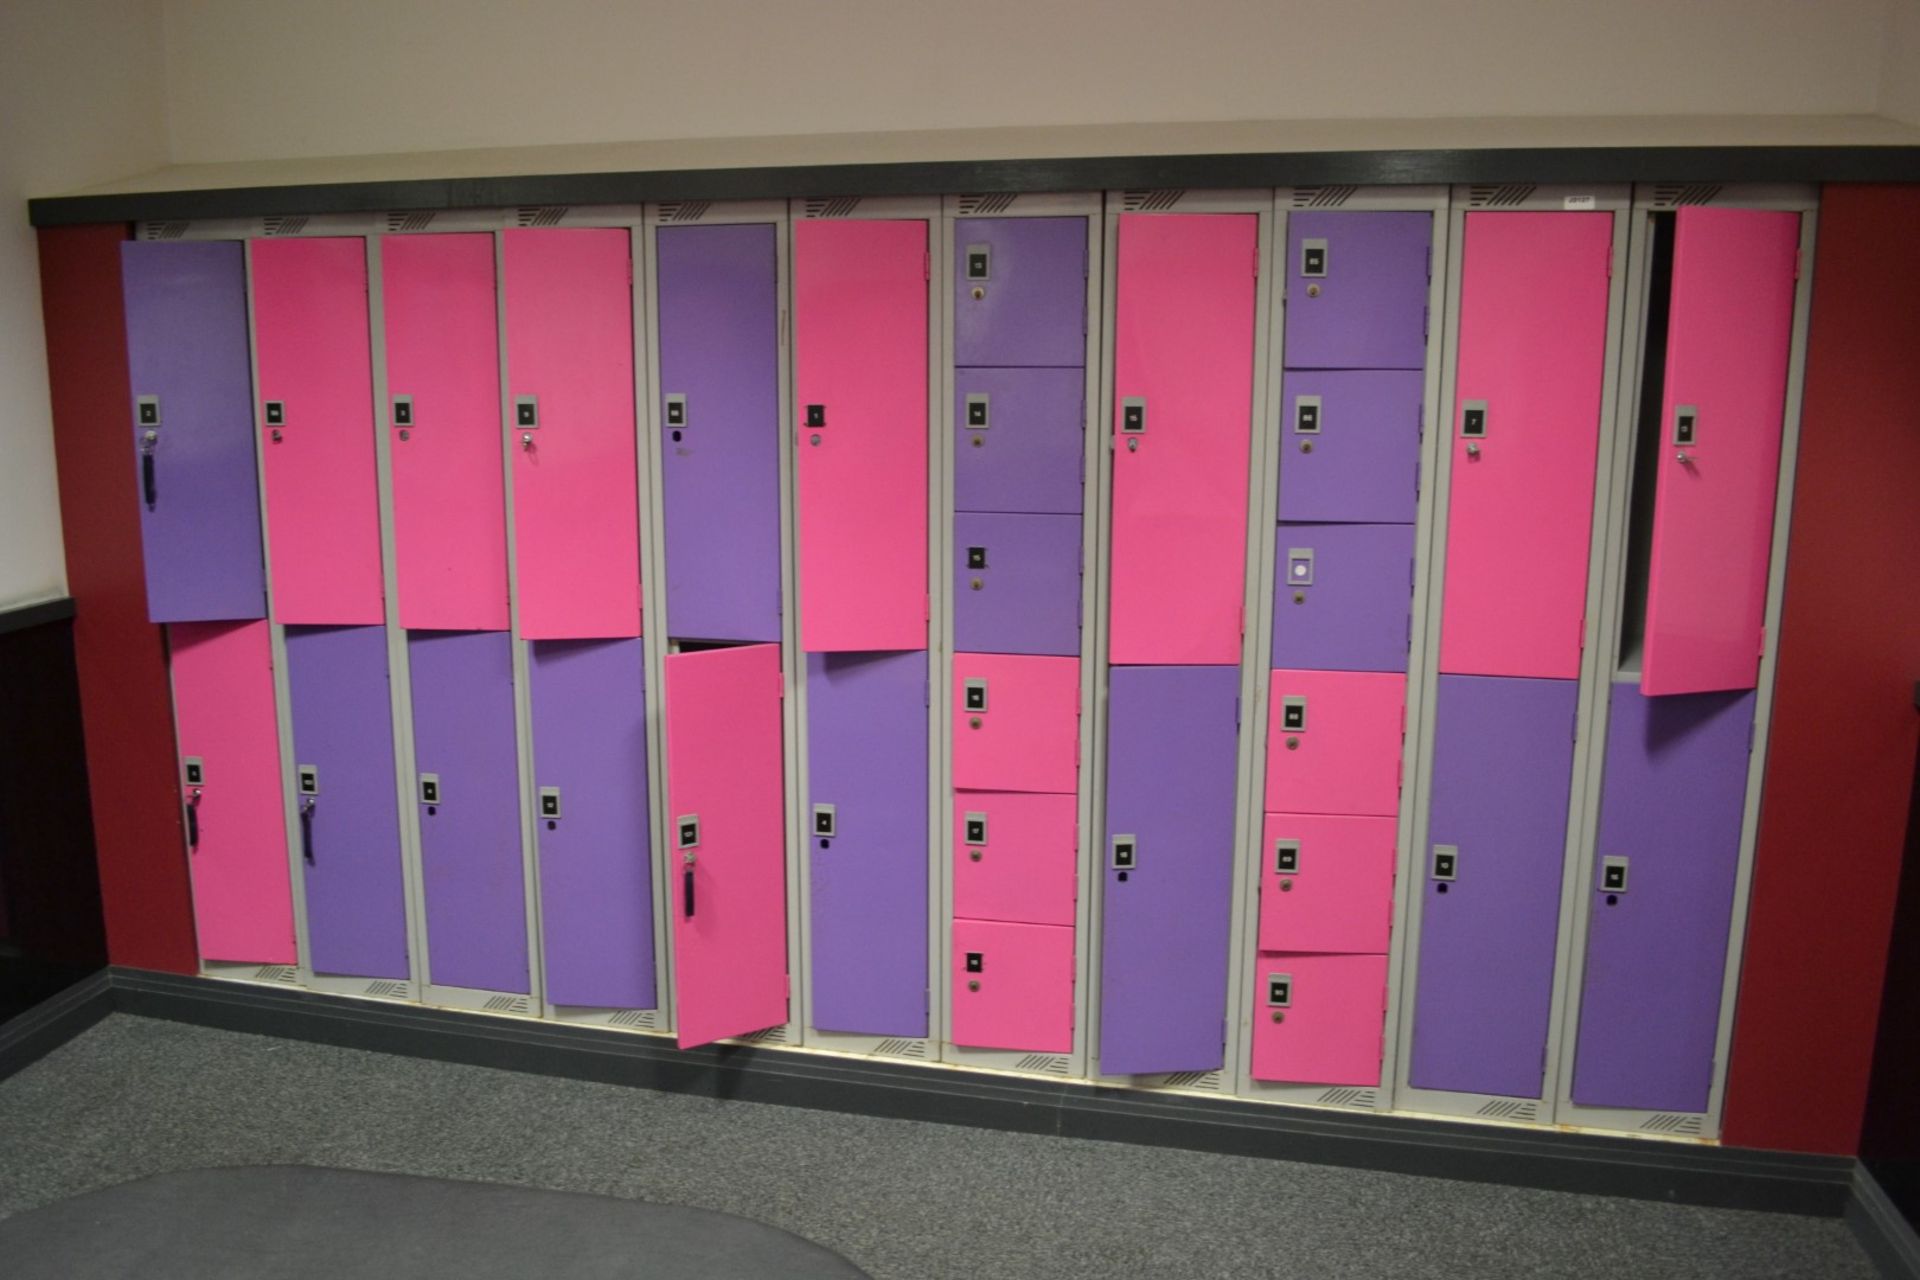 30 x Steel Changing Room Lockers in Purple and Pink - Some With Keys and Some Without - - Image 2 of 2